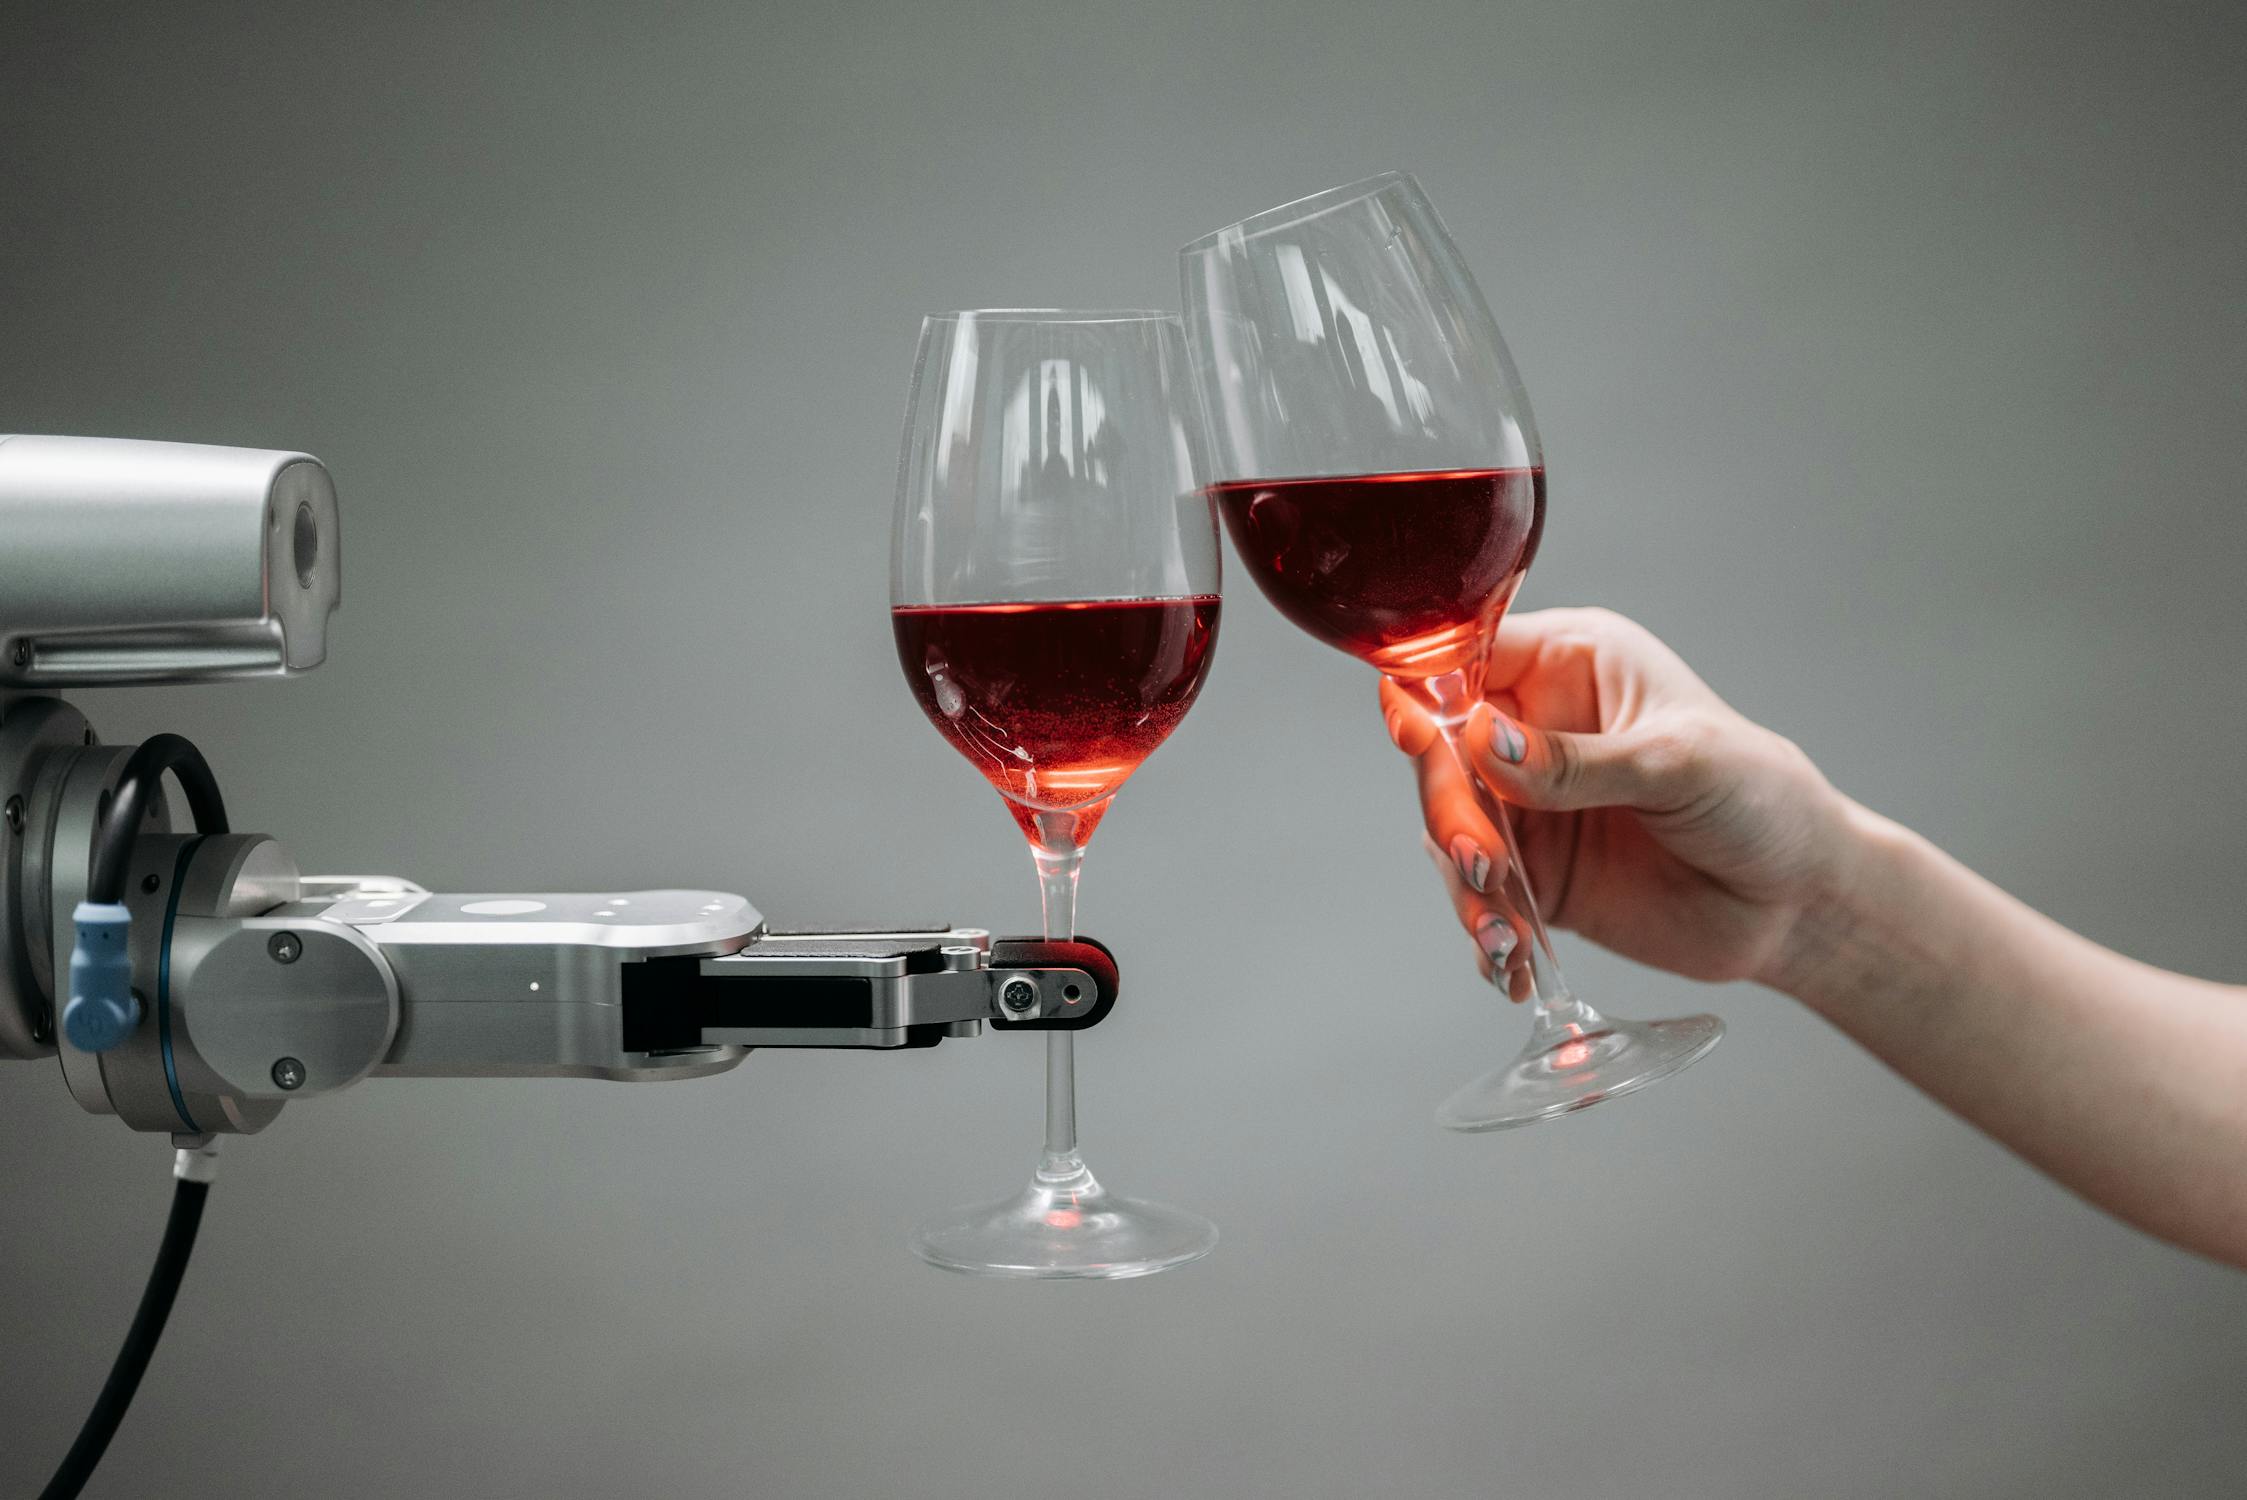 A robot arm holding a wine glass and toasting with a human hand holding a wine glass